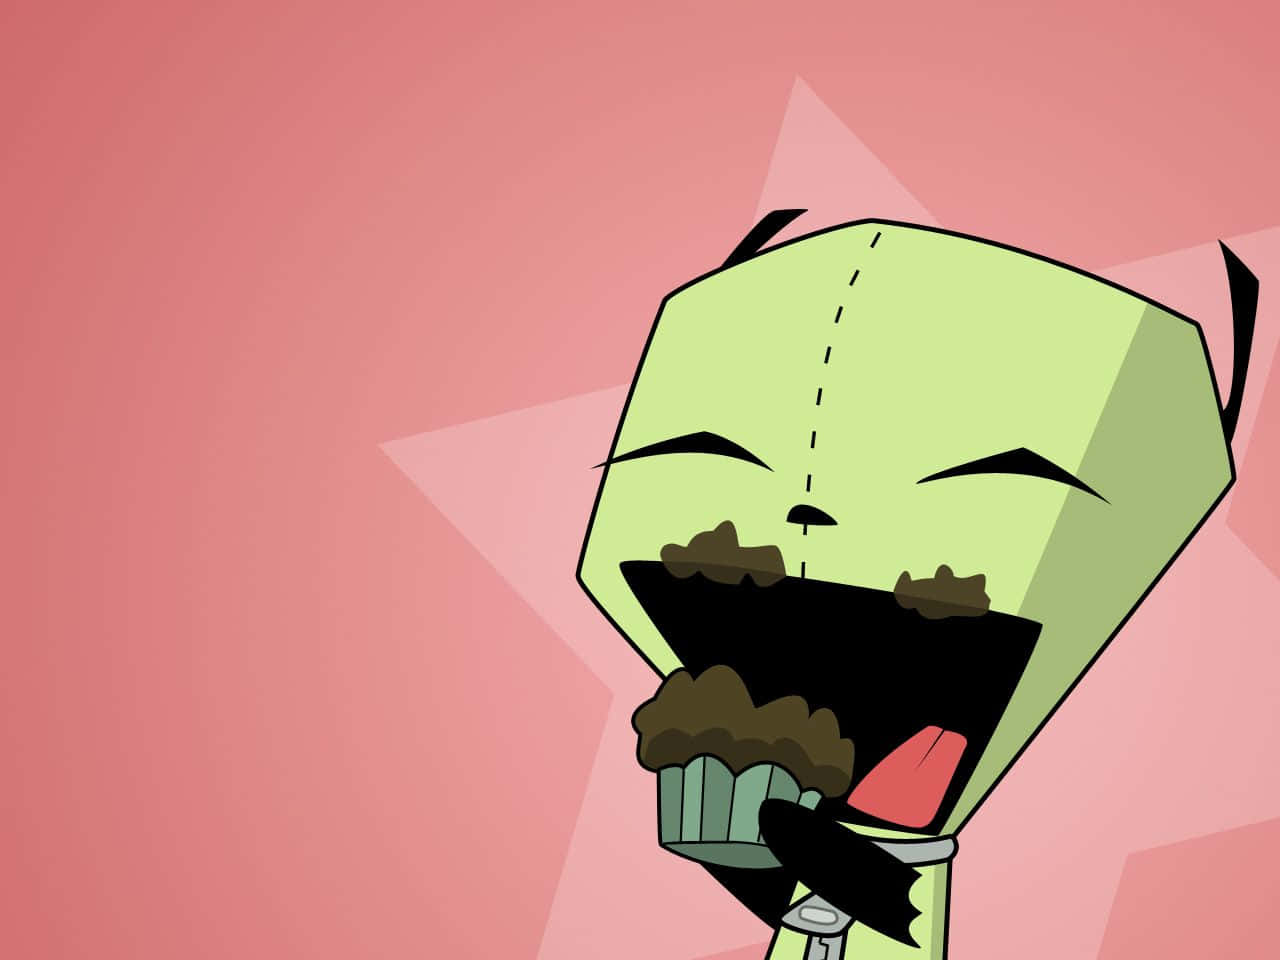 Invader Zim and Gir unleash their evil plans